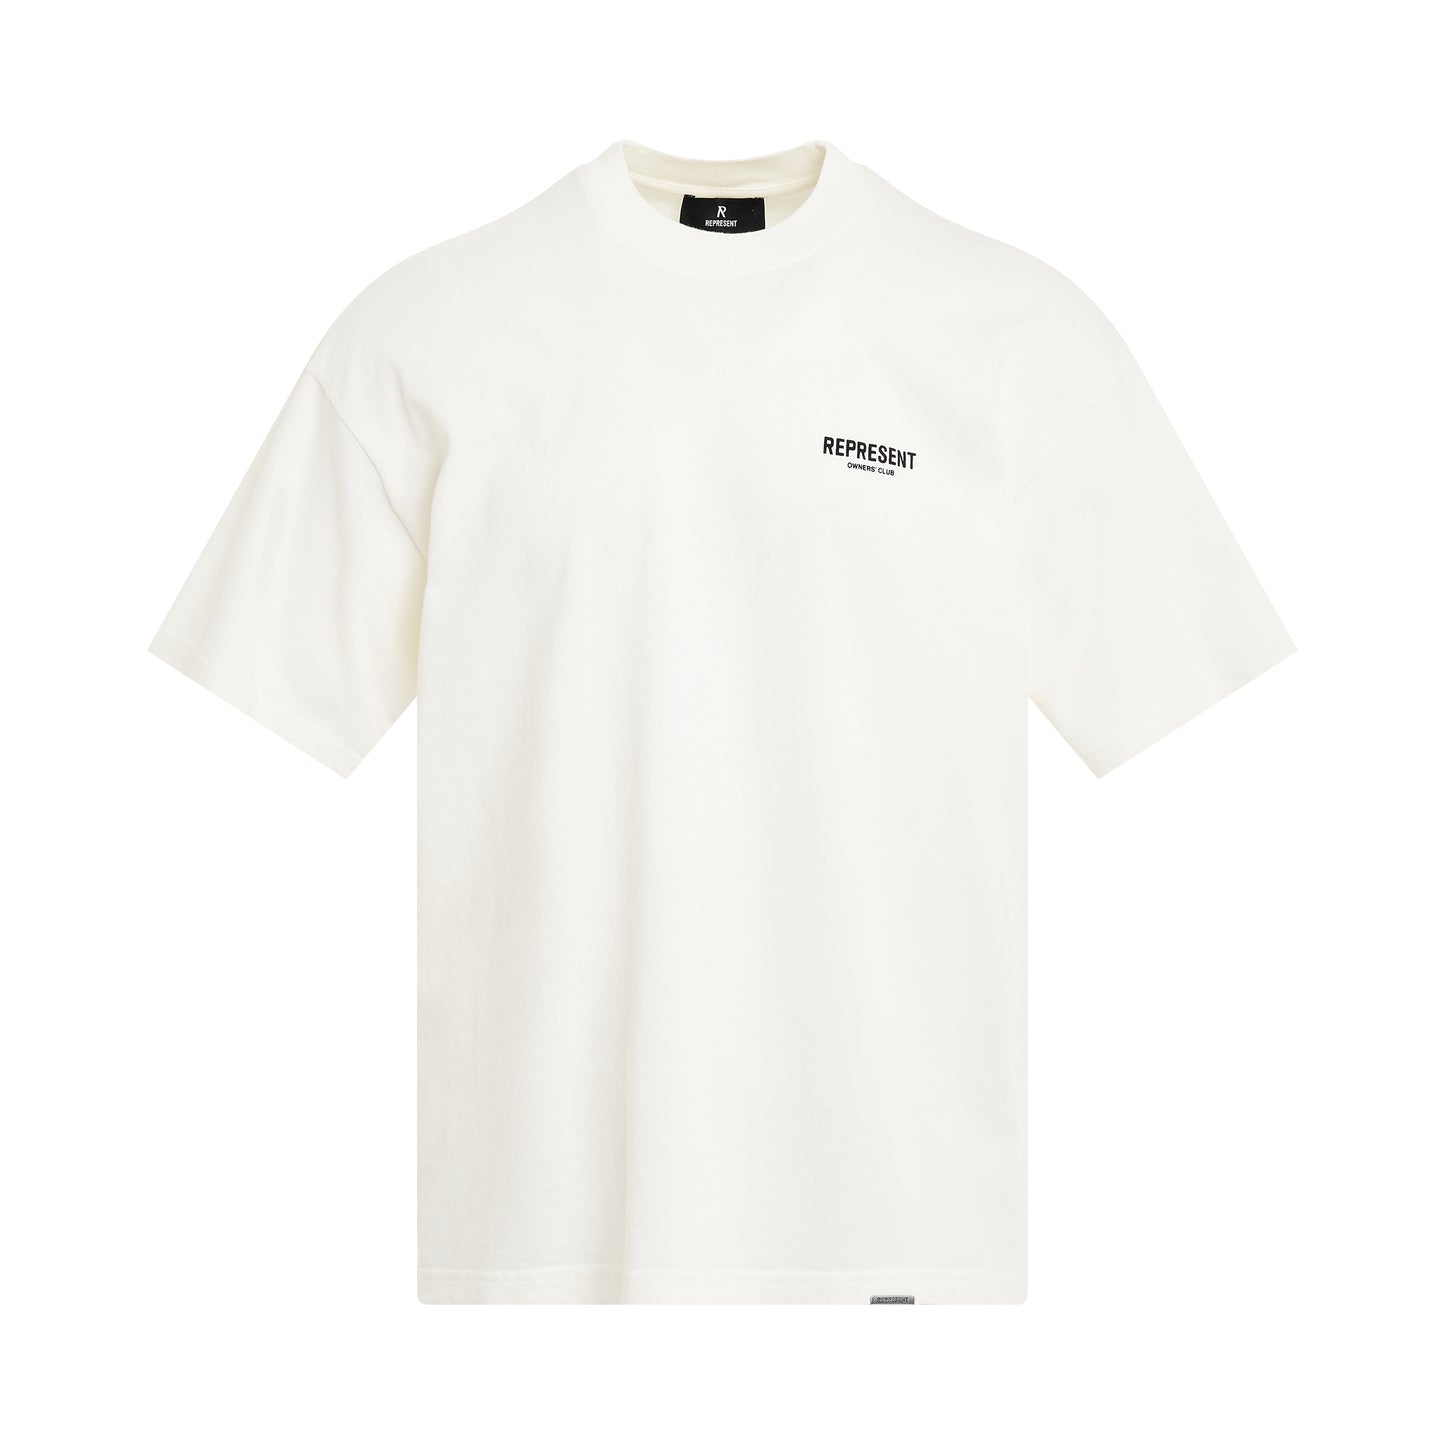 New Represent Owners Club T-Shirt in Flat White